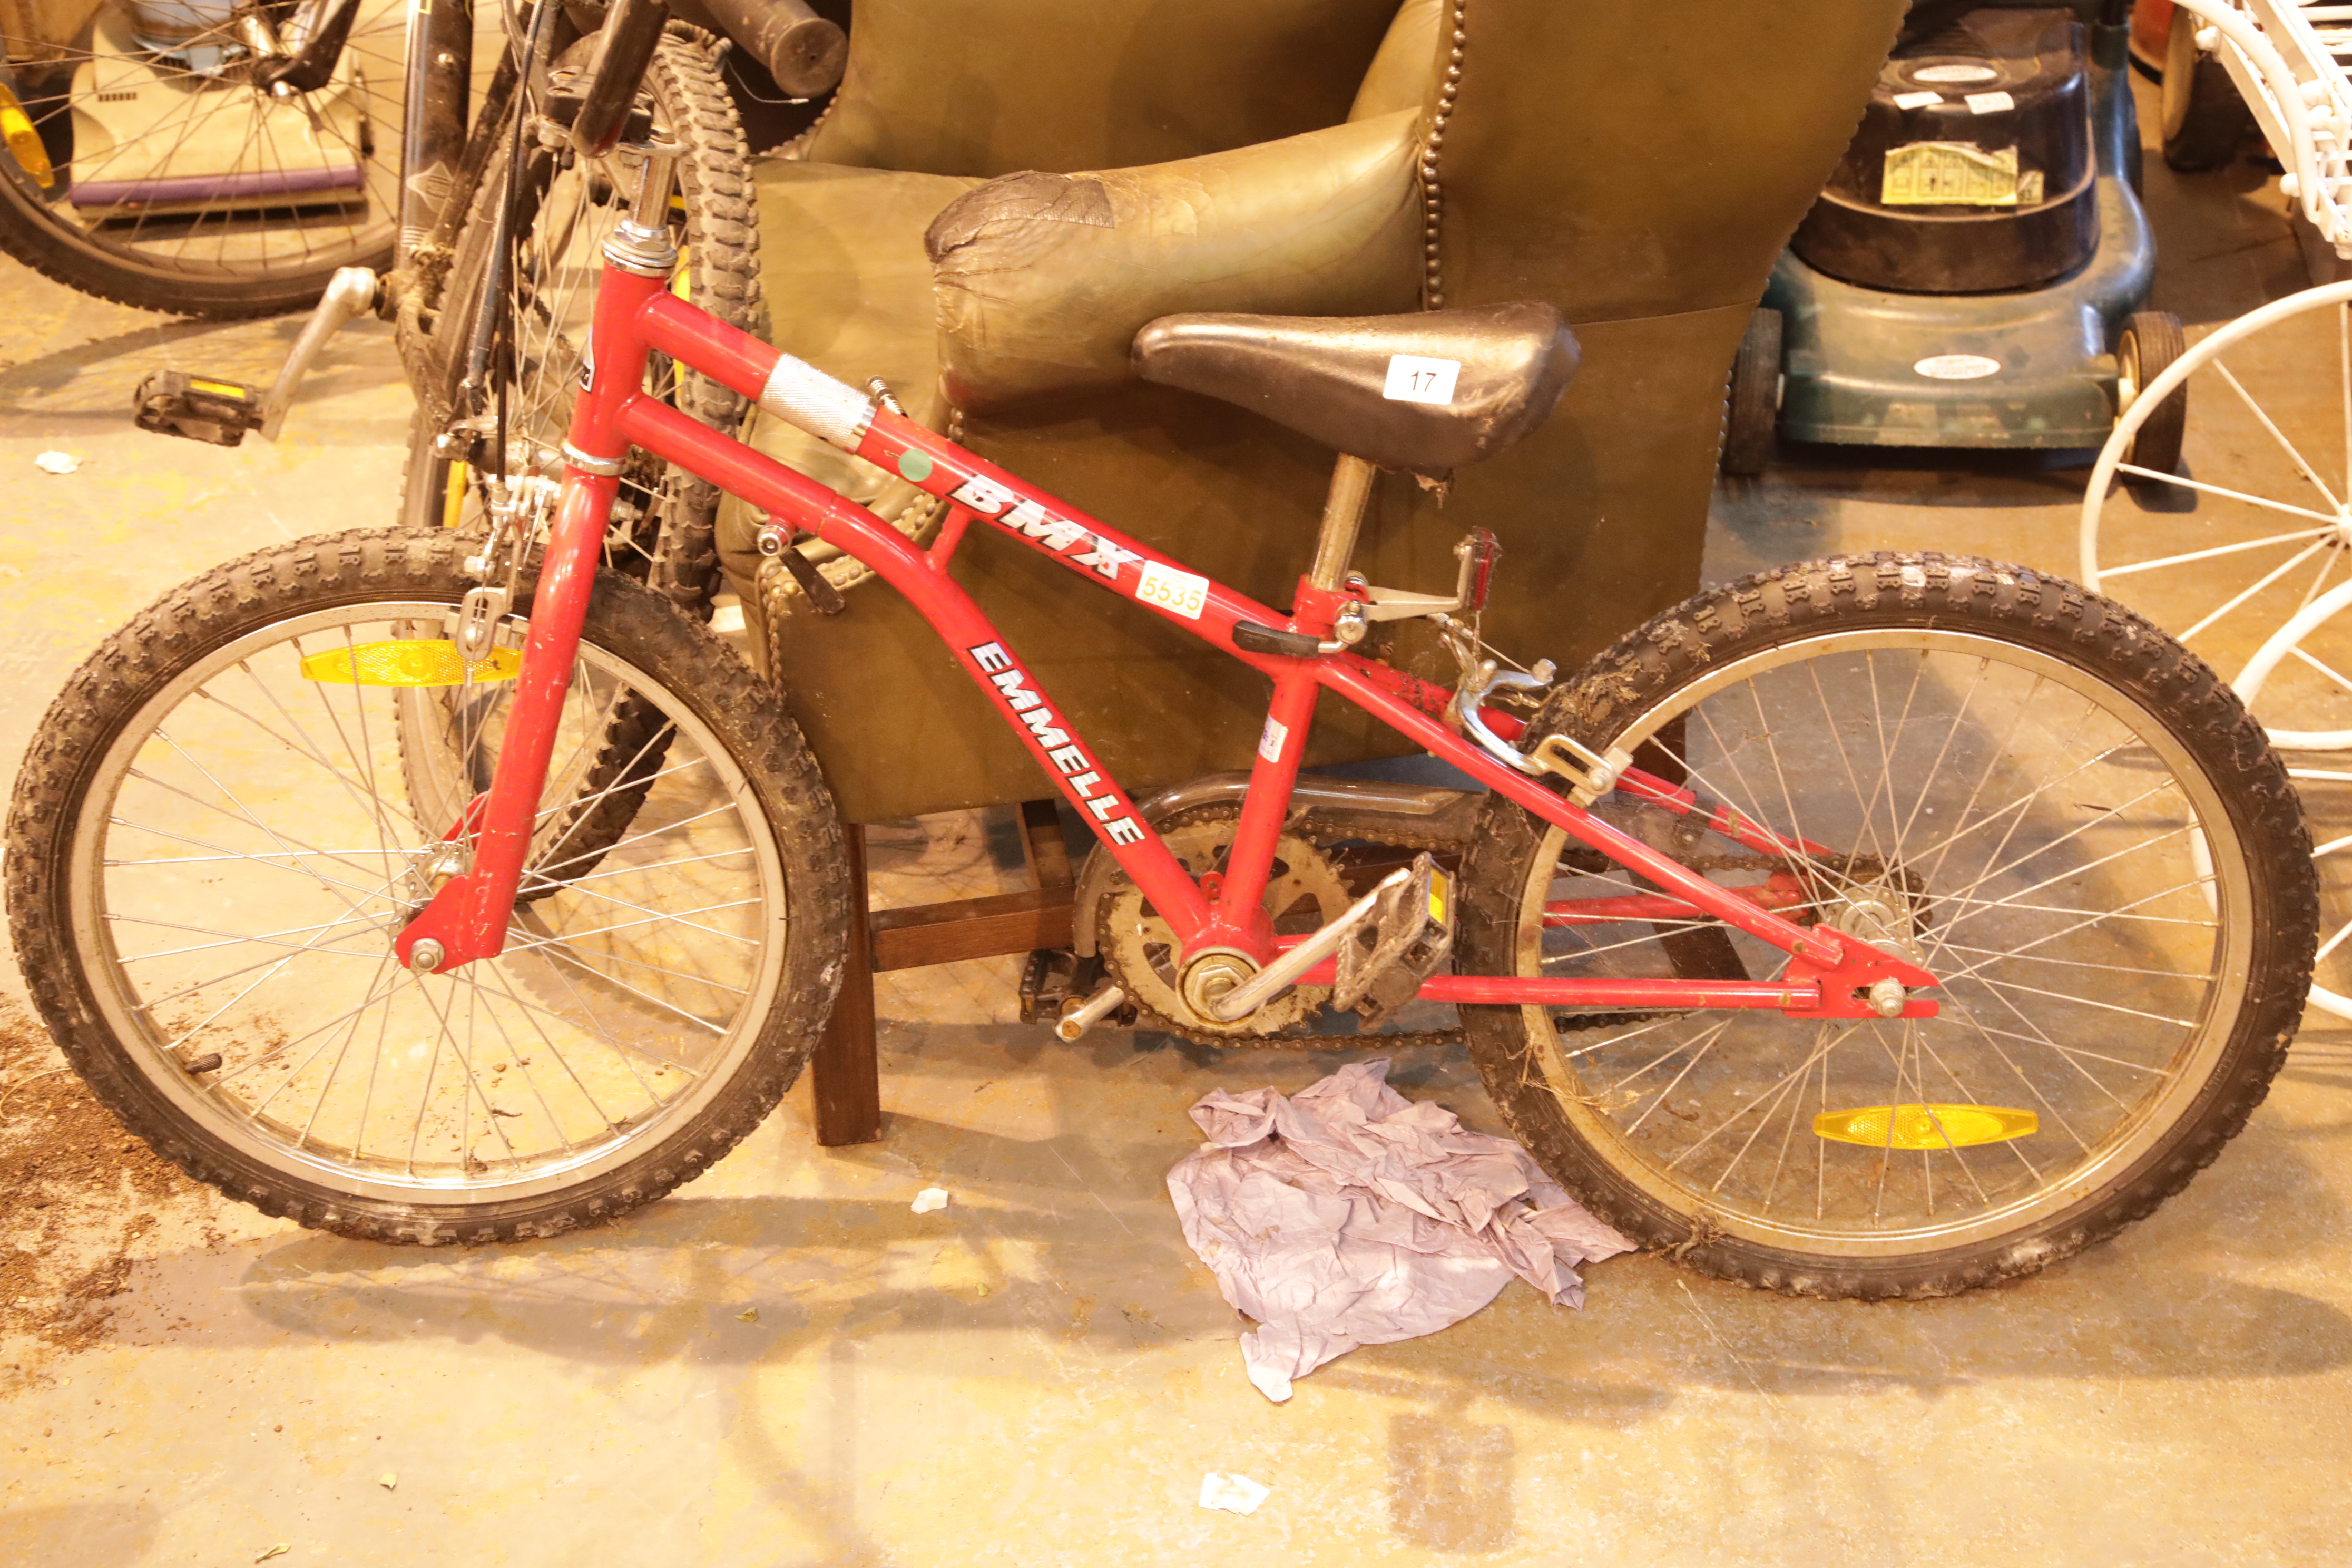 Childs Emmelle BMX bike. Not available for in-house P&P.